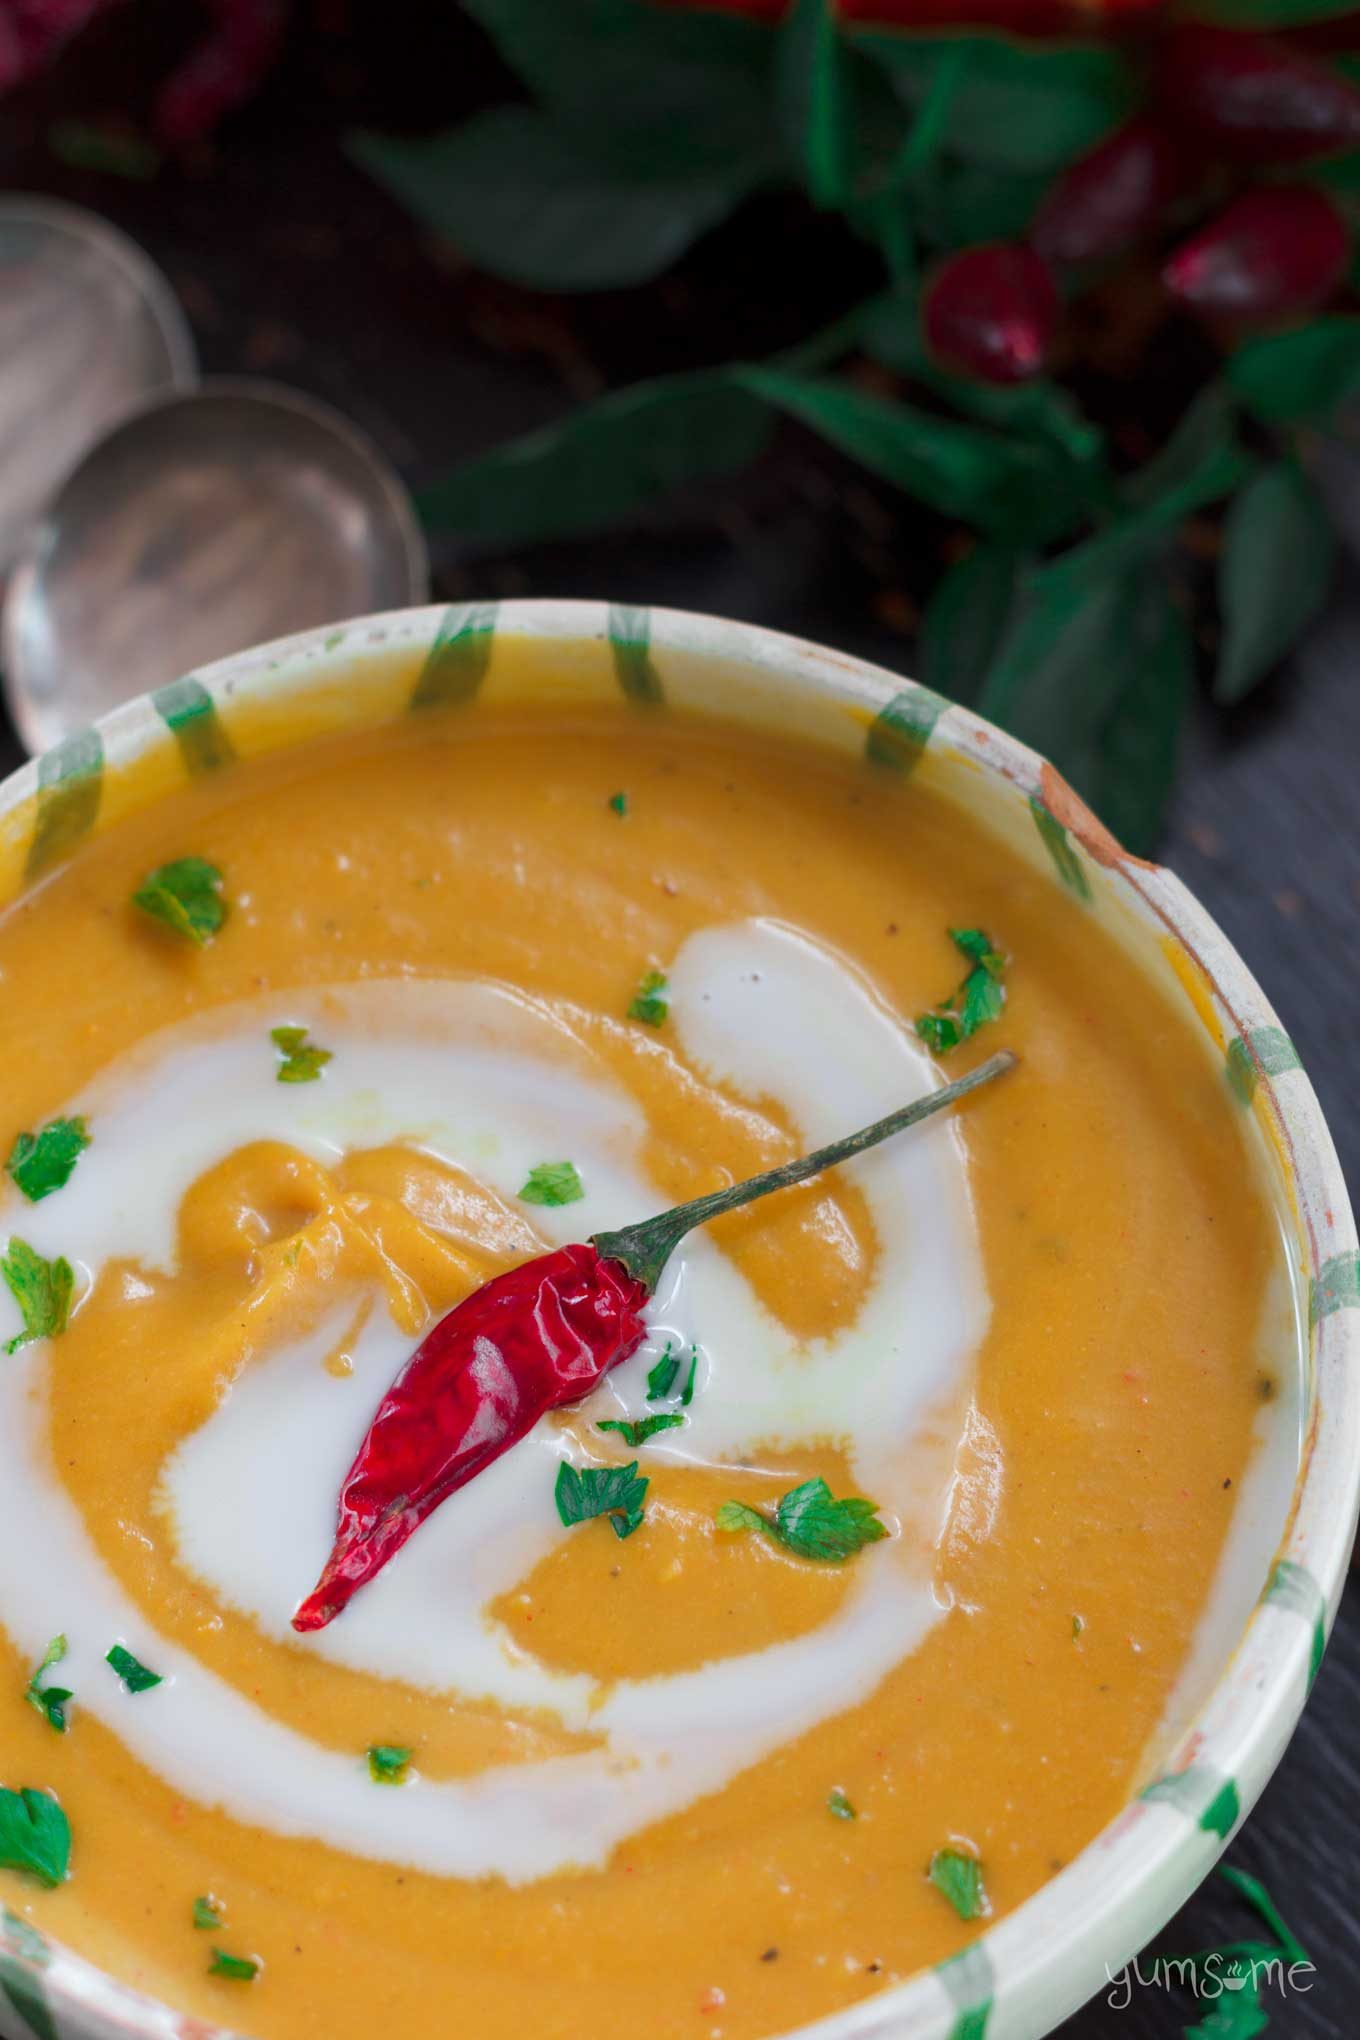 Overhead shot of a bowl of curried butternut squash soup with a swirl of coconut cream over the top. In the background are some green leaves and red chillies.